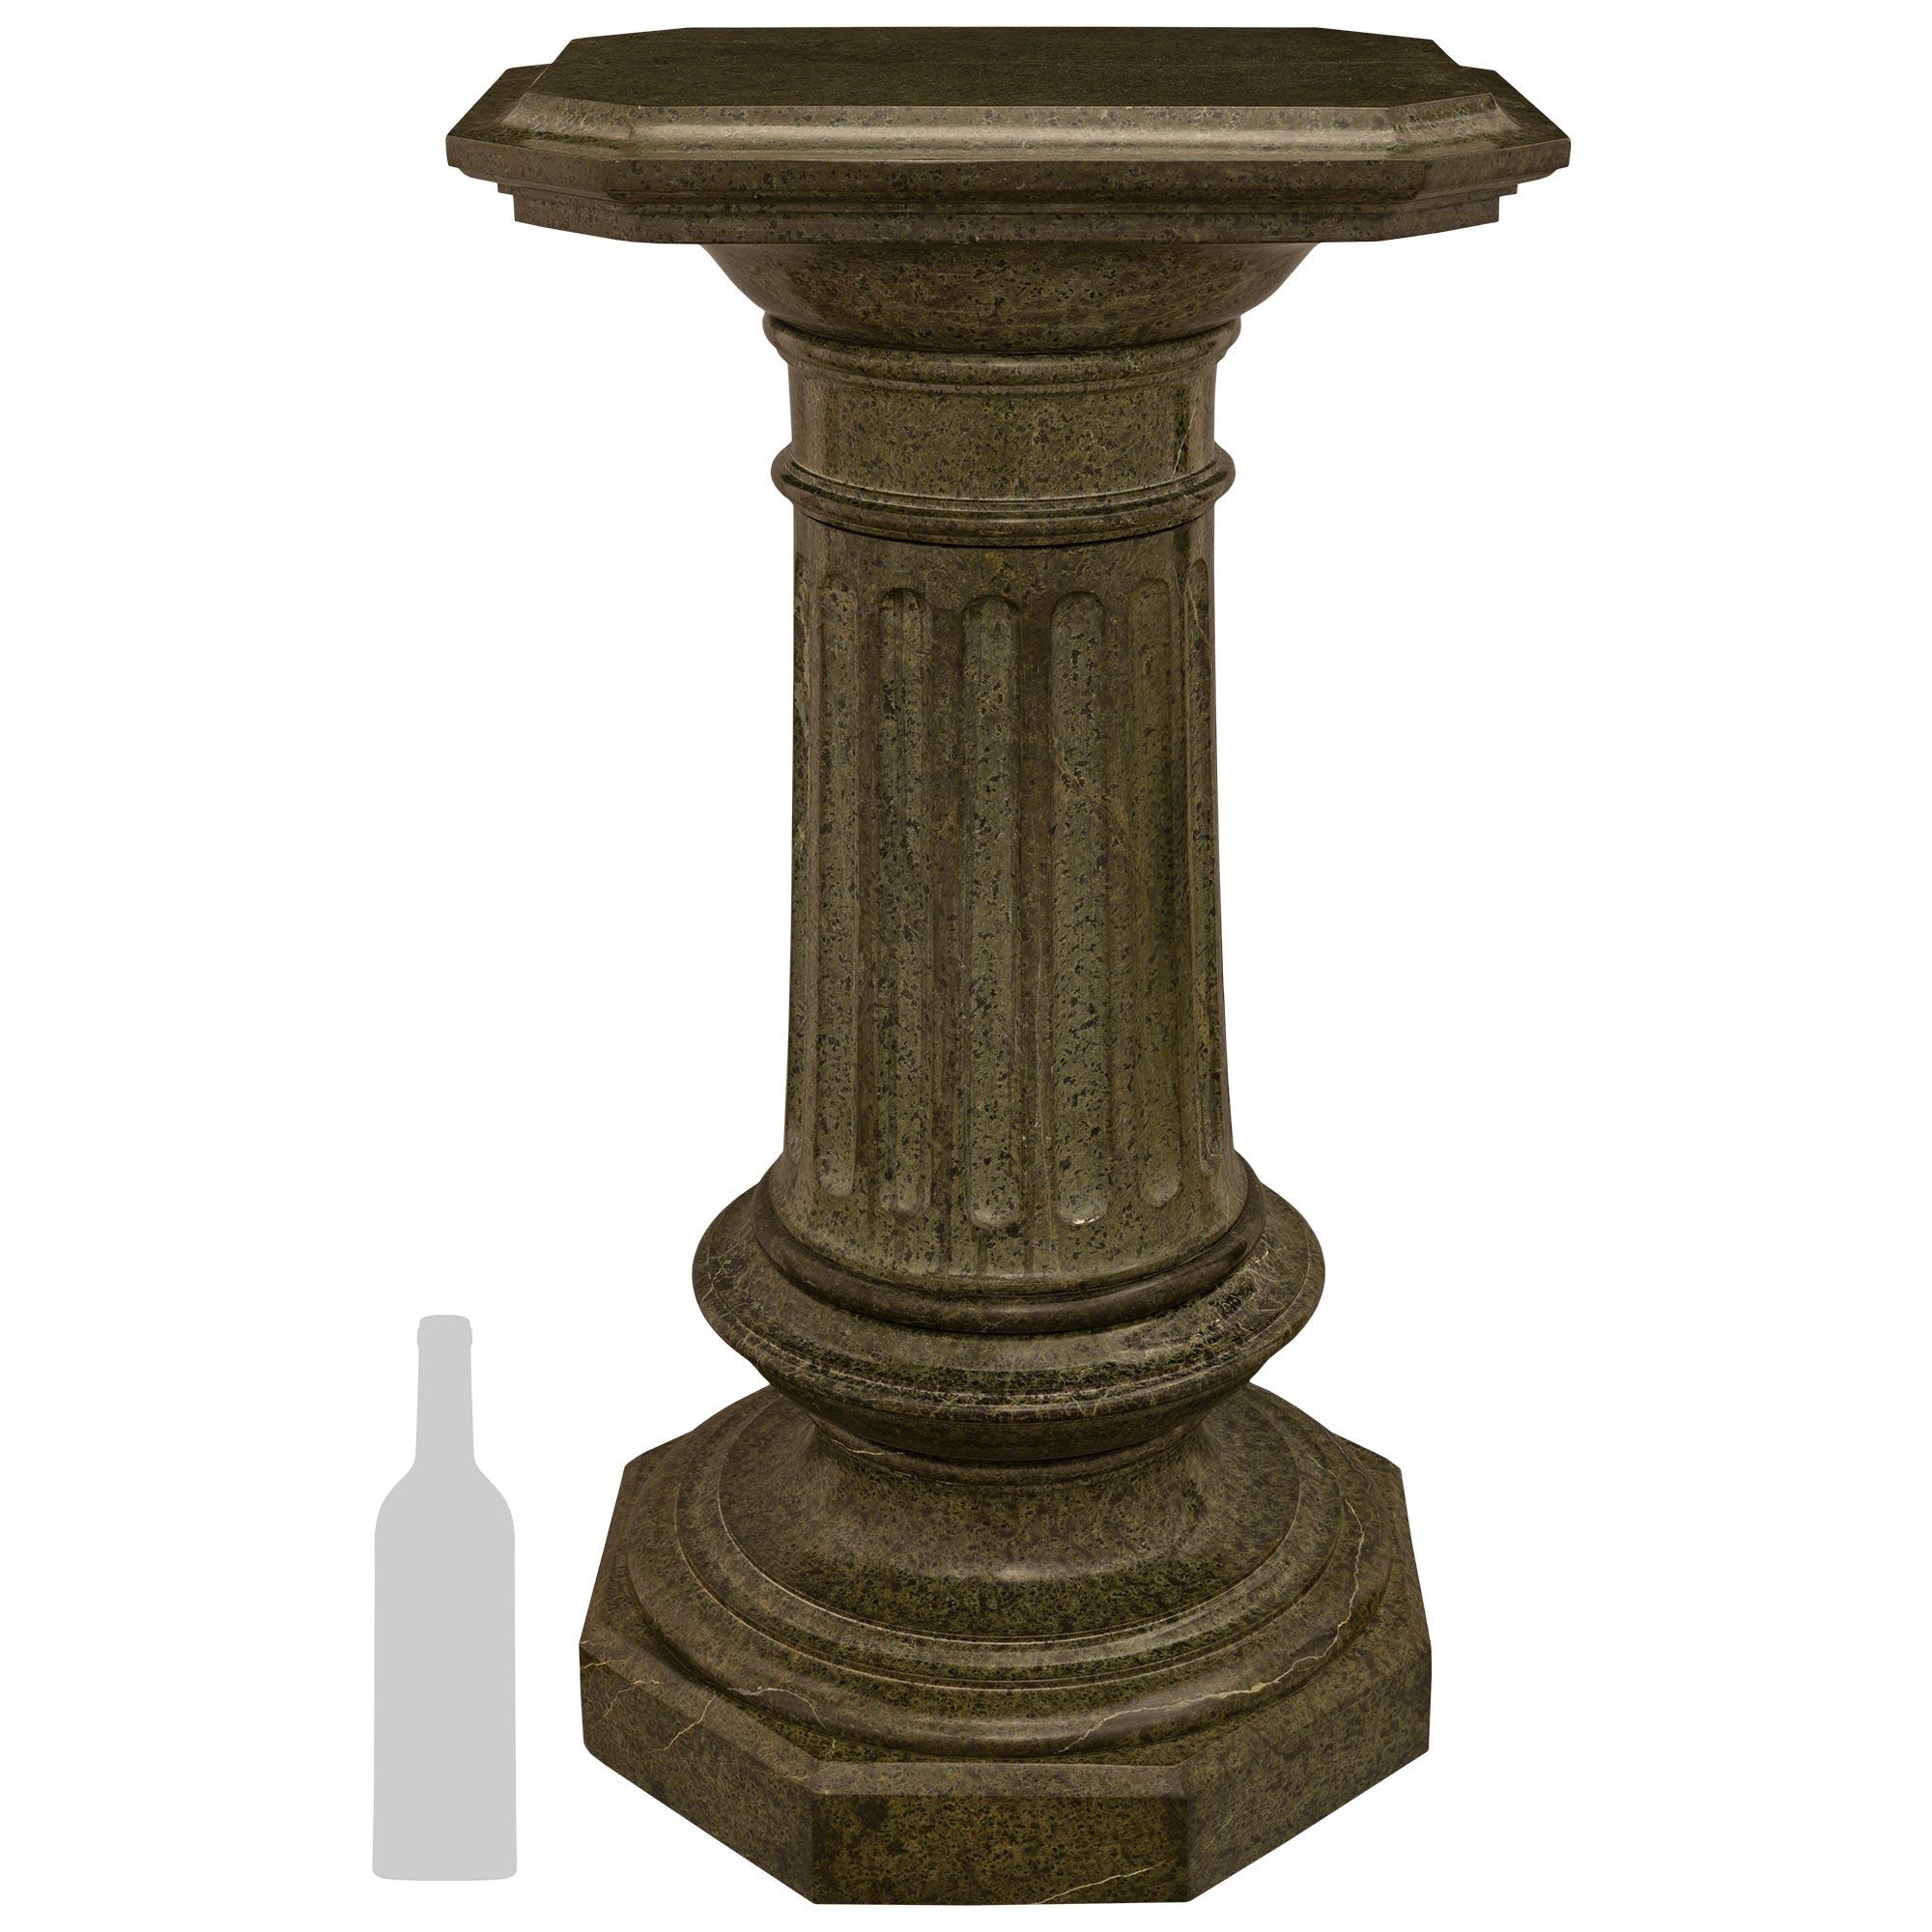 A handsome and large scaled Italian 19th century Vert de Patricia marble pedestal.